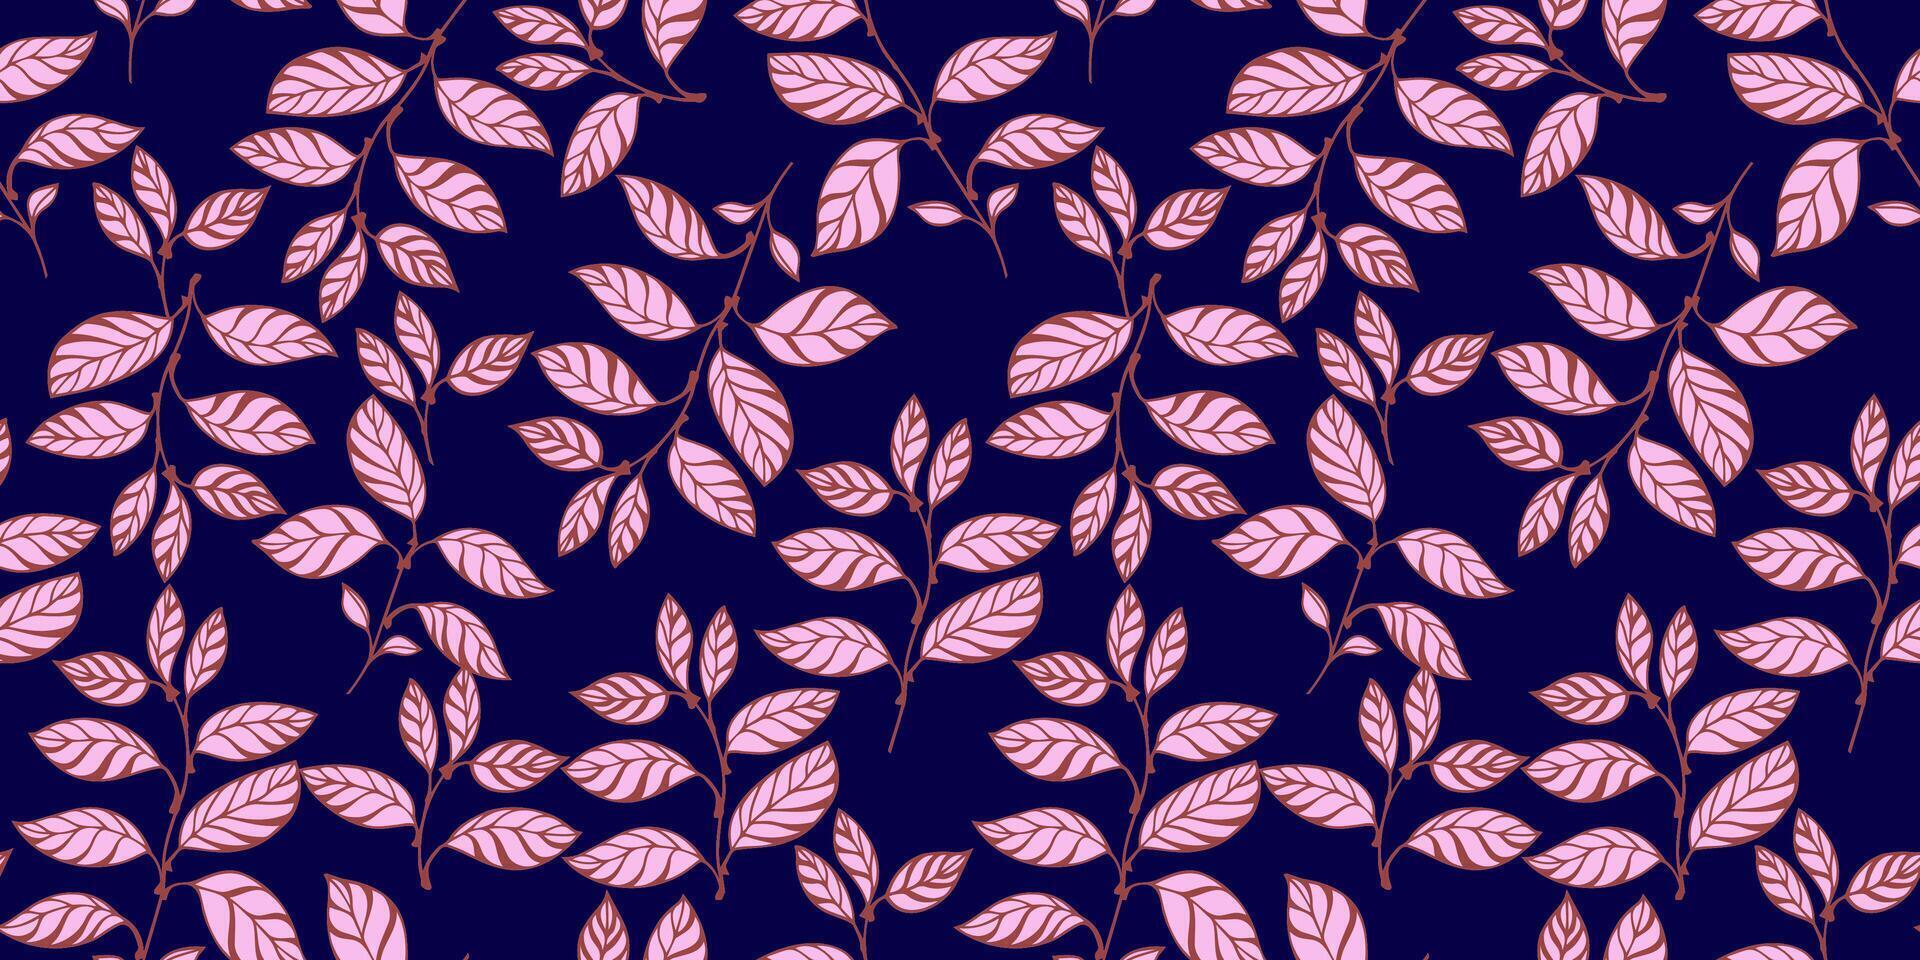 Creative, abstract, bright leaves branches intertwined in a seamless pattern. Vector drawn illustration shape leaf stems. Stylized tropical floral on a dark blue background. Template for design